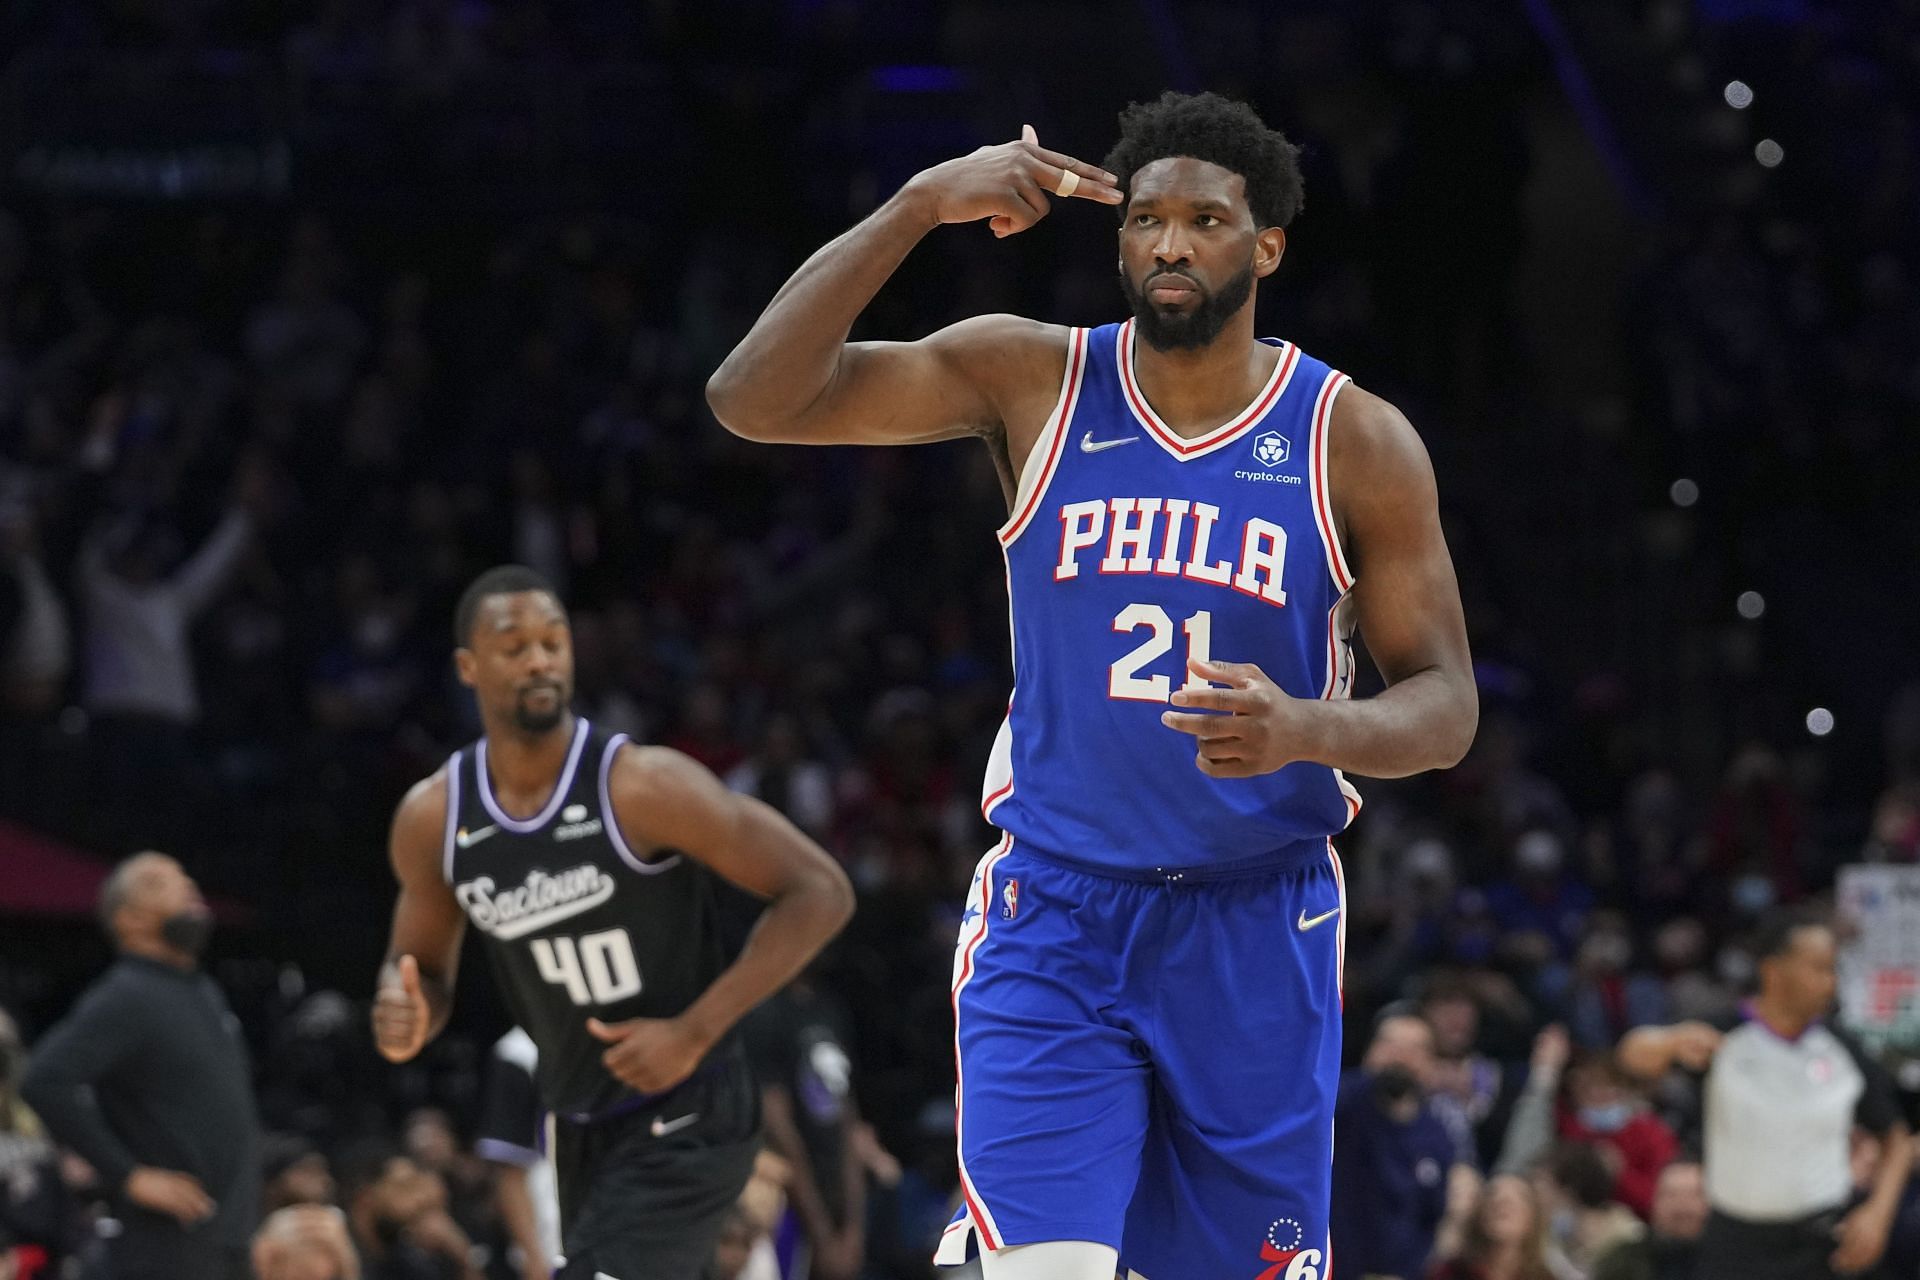 The Philadelphia 76ers have rallied behind their big man.